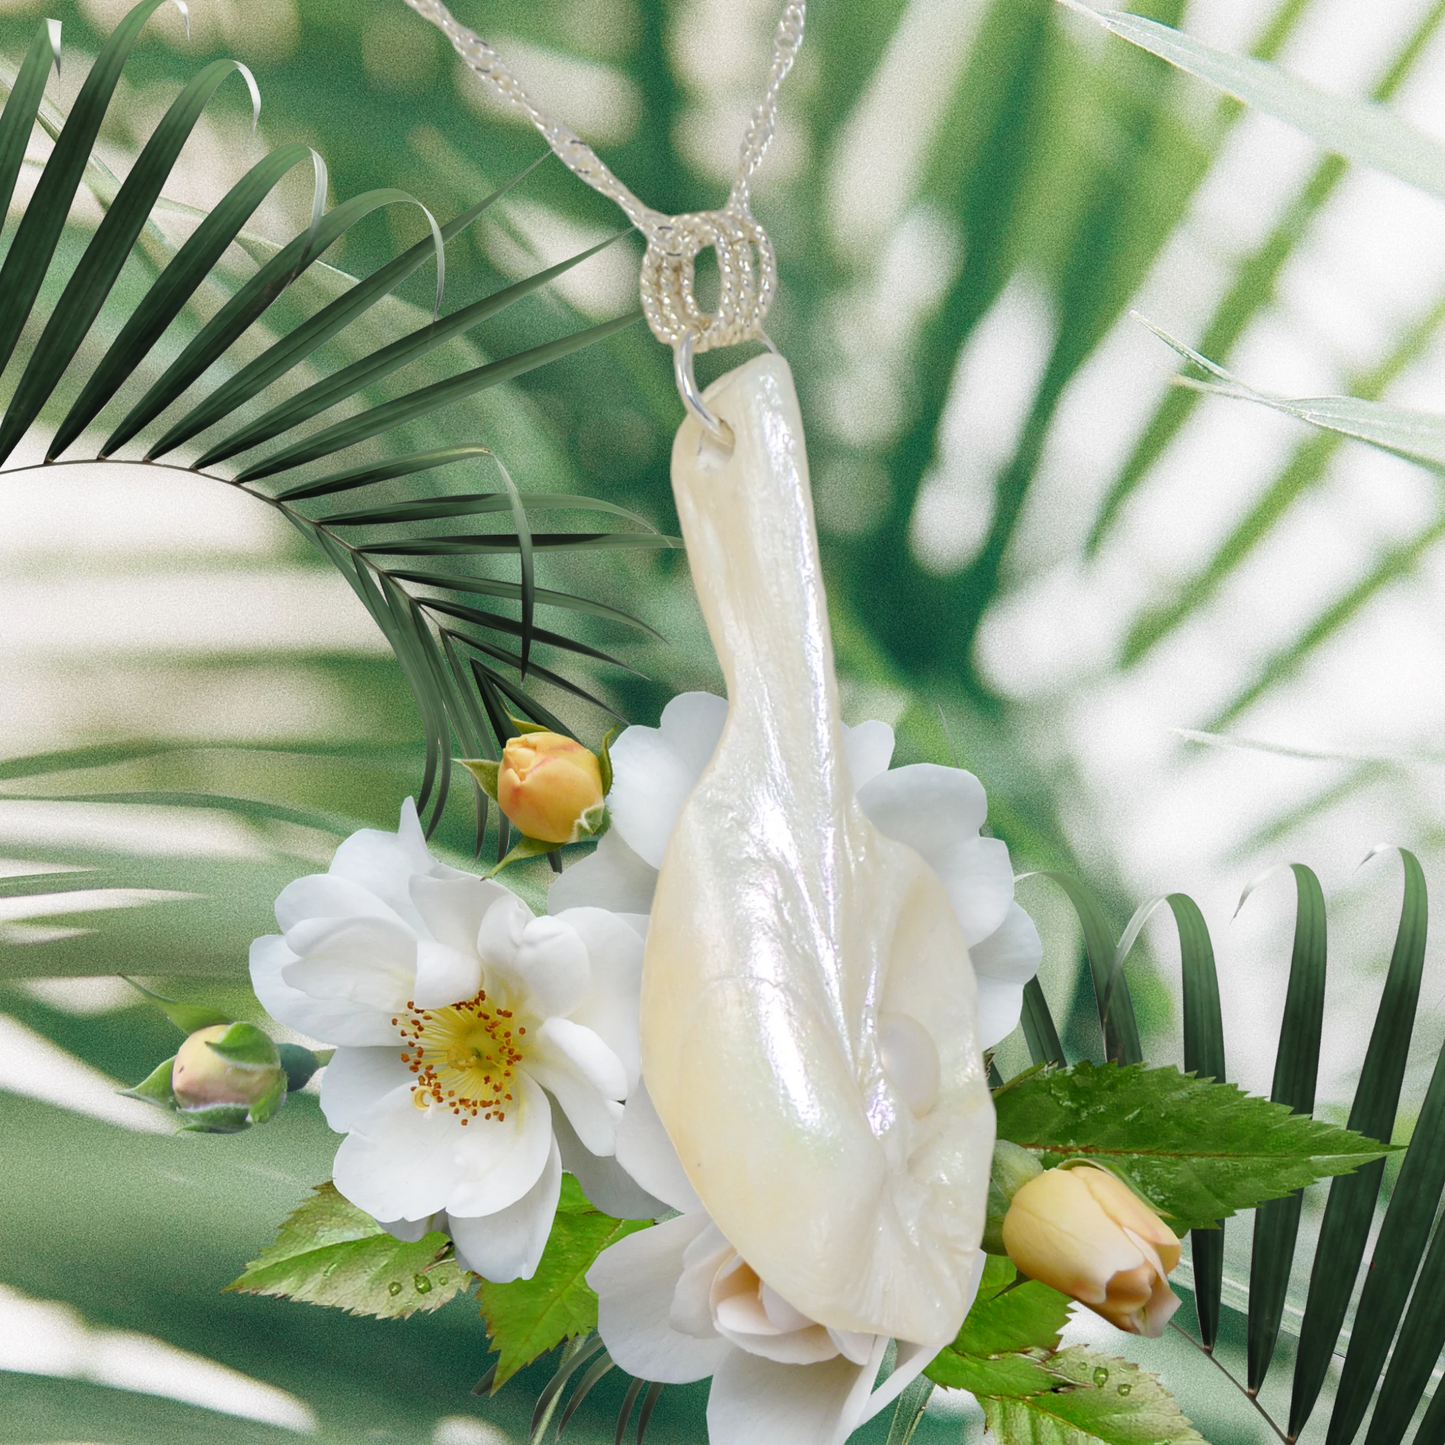 Amara is the name of this one of a kind pendant made from a natural seashell from the beach of Vancouver Island.  The pendant has a real freshwater pearl.  The pendant is being showcased showing the right side of the pendant.